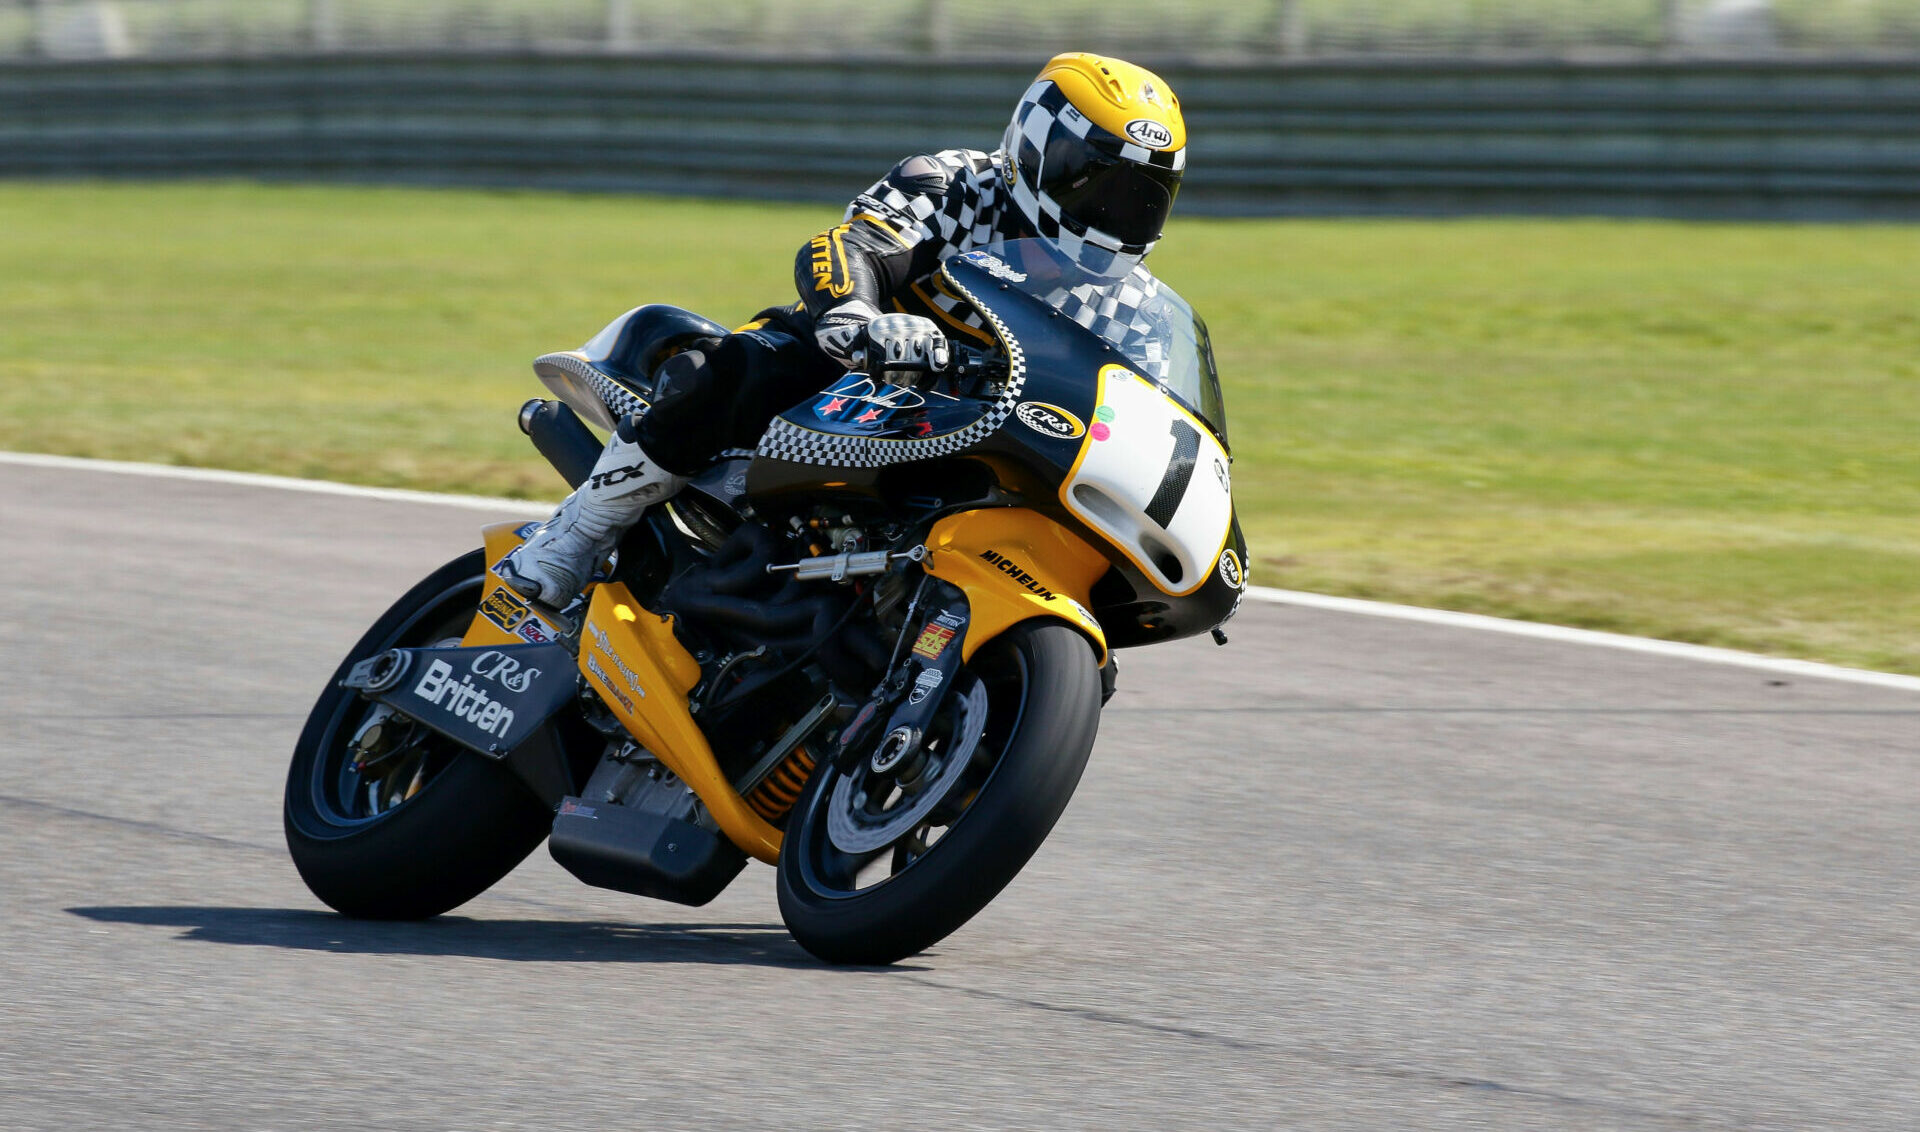 Stephen Briggs (1) riding Bob Robbins' Britten V1000 at the Barber Vintage Festival at Barber Motorsports Park in 2015. Photo by etechphoto.com, courtesy AHRMA.